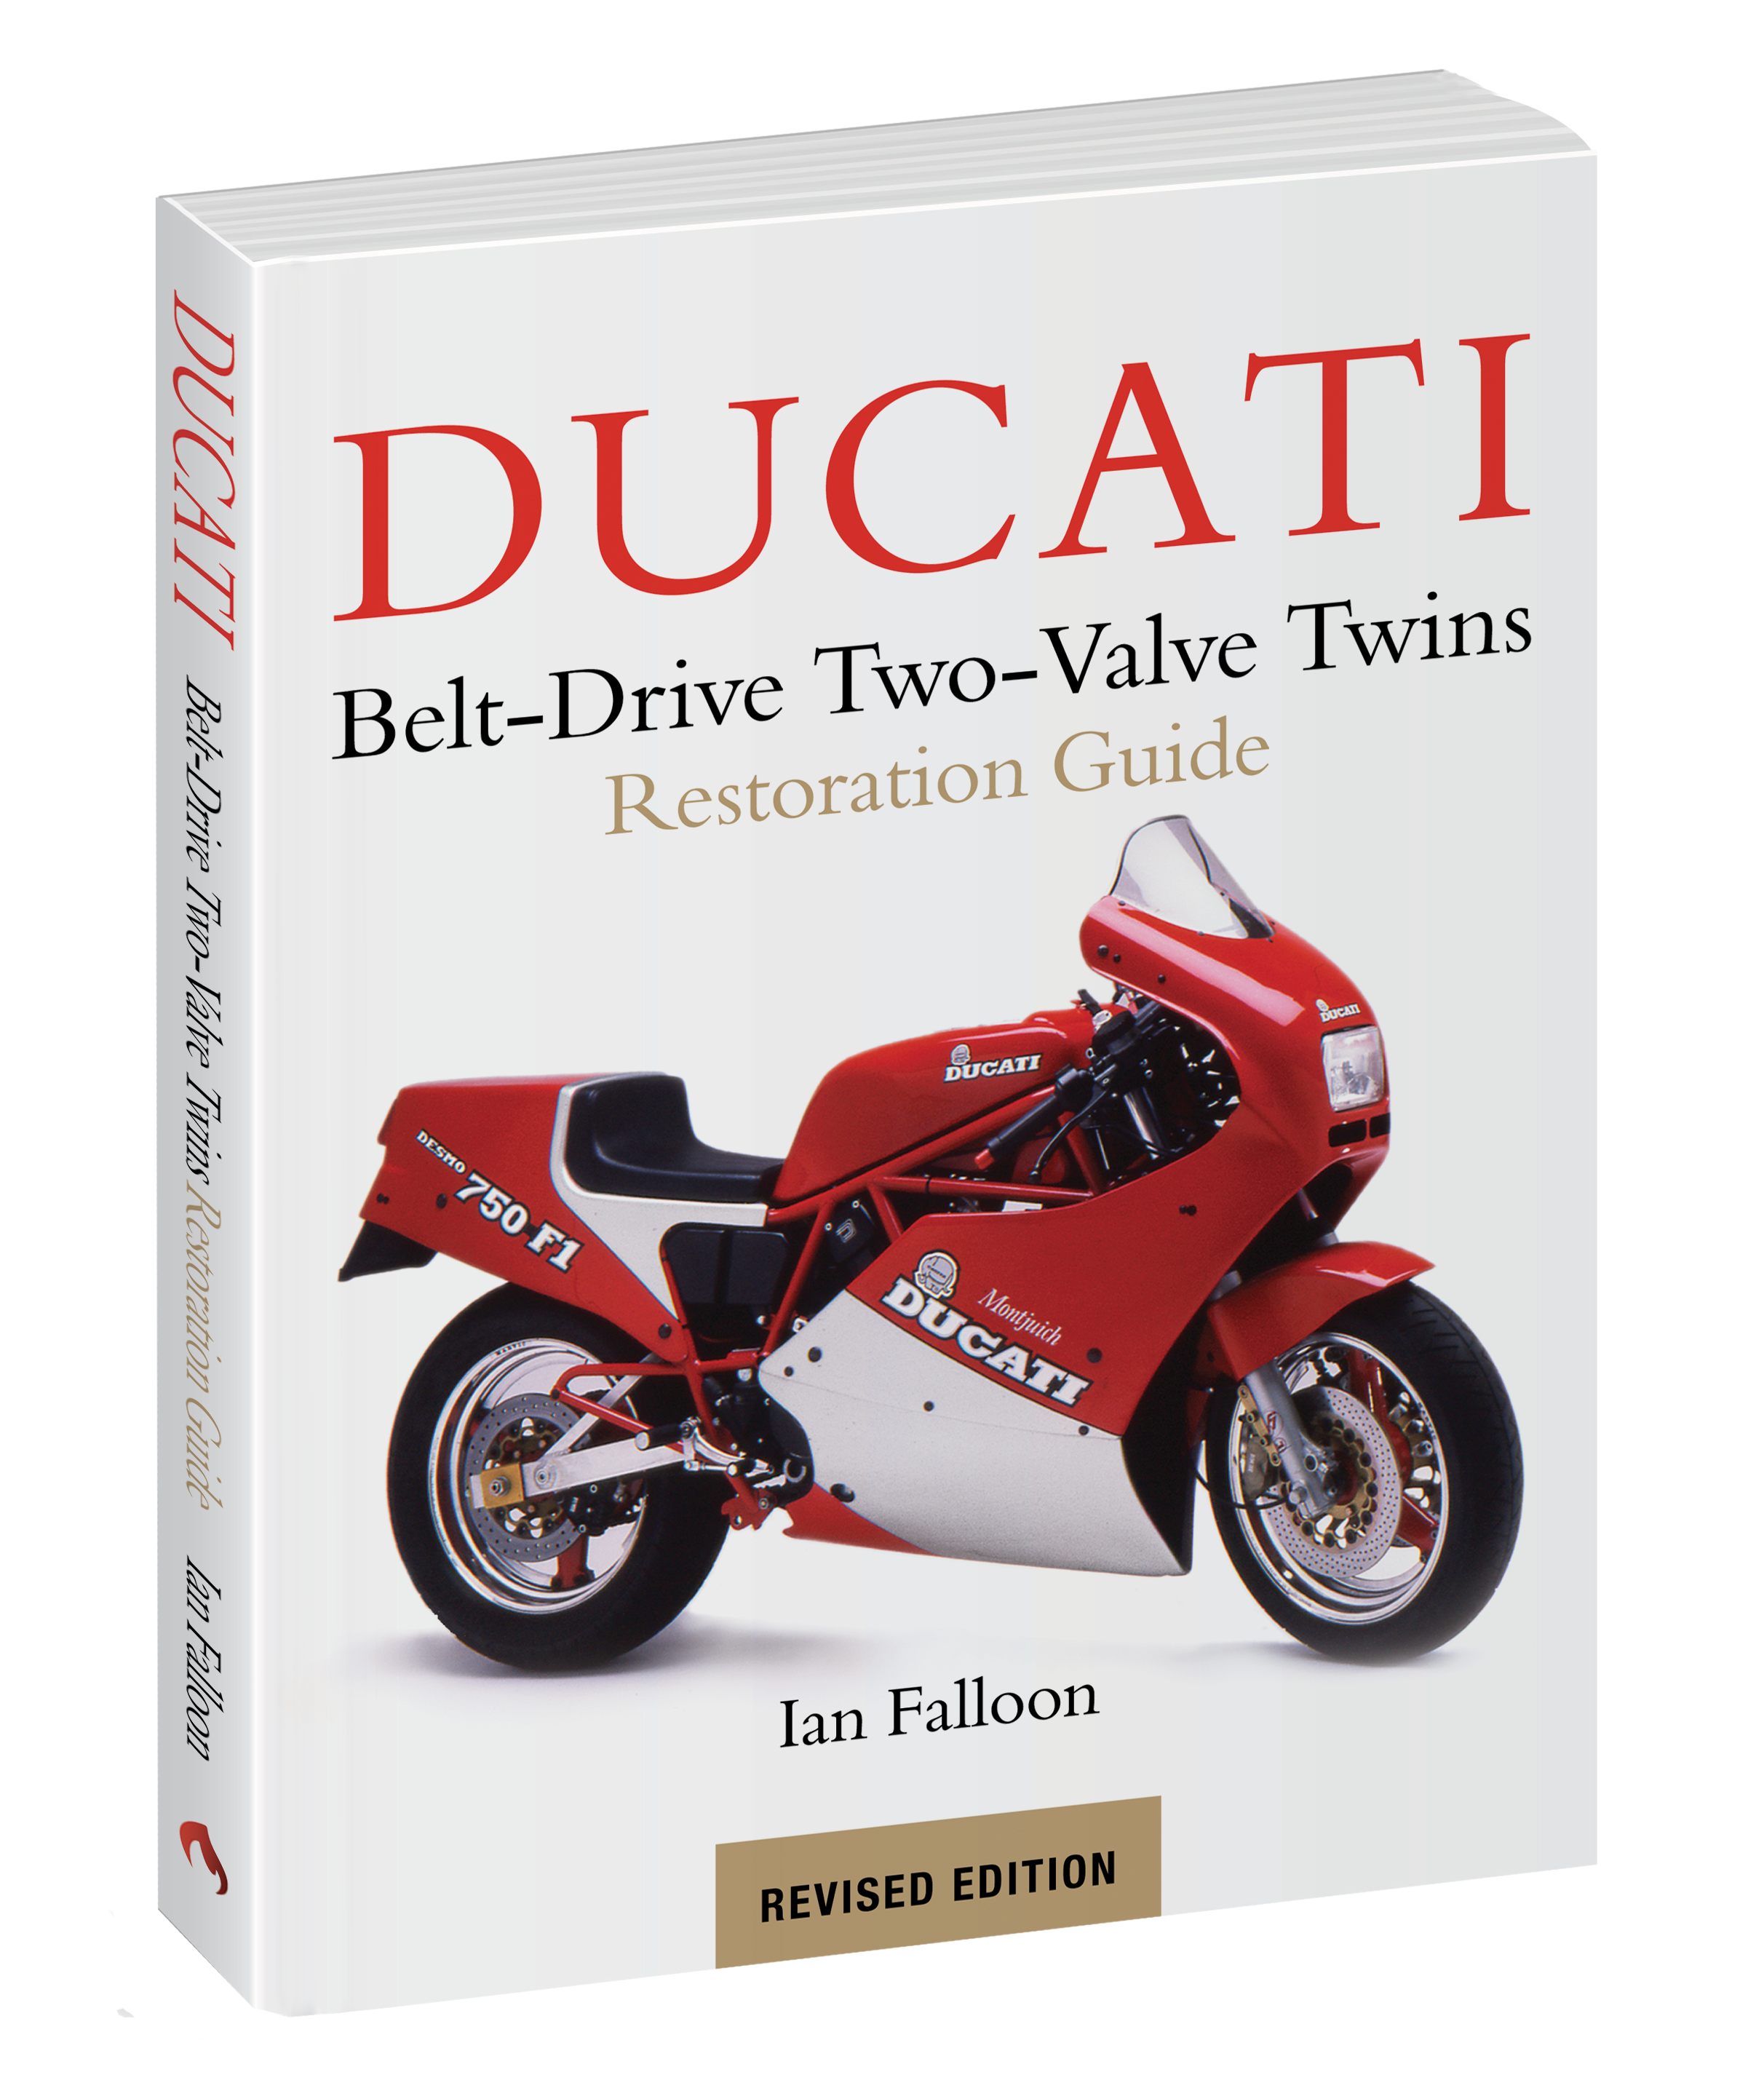 Ducati Monster Two-Valve Fans, This Book Is For You